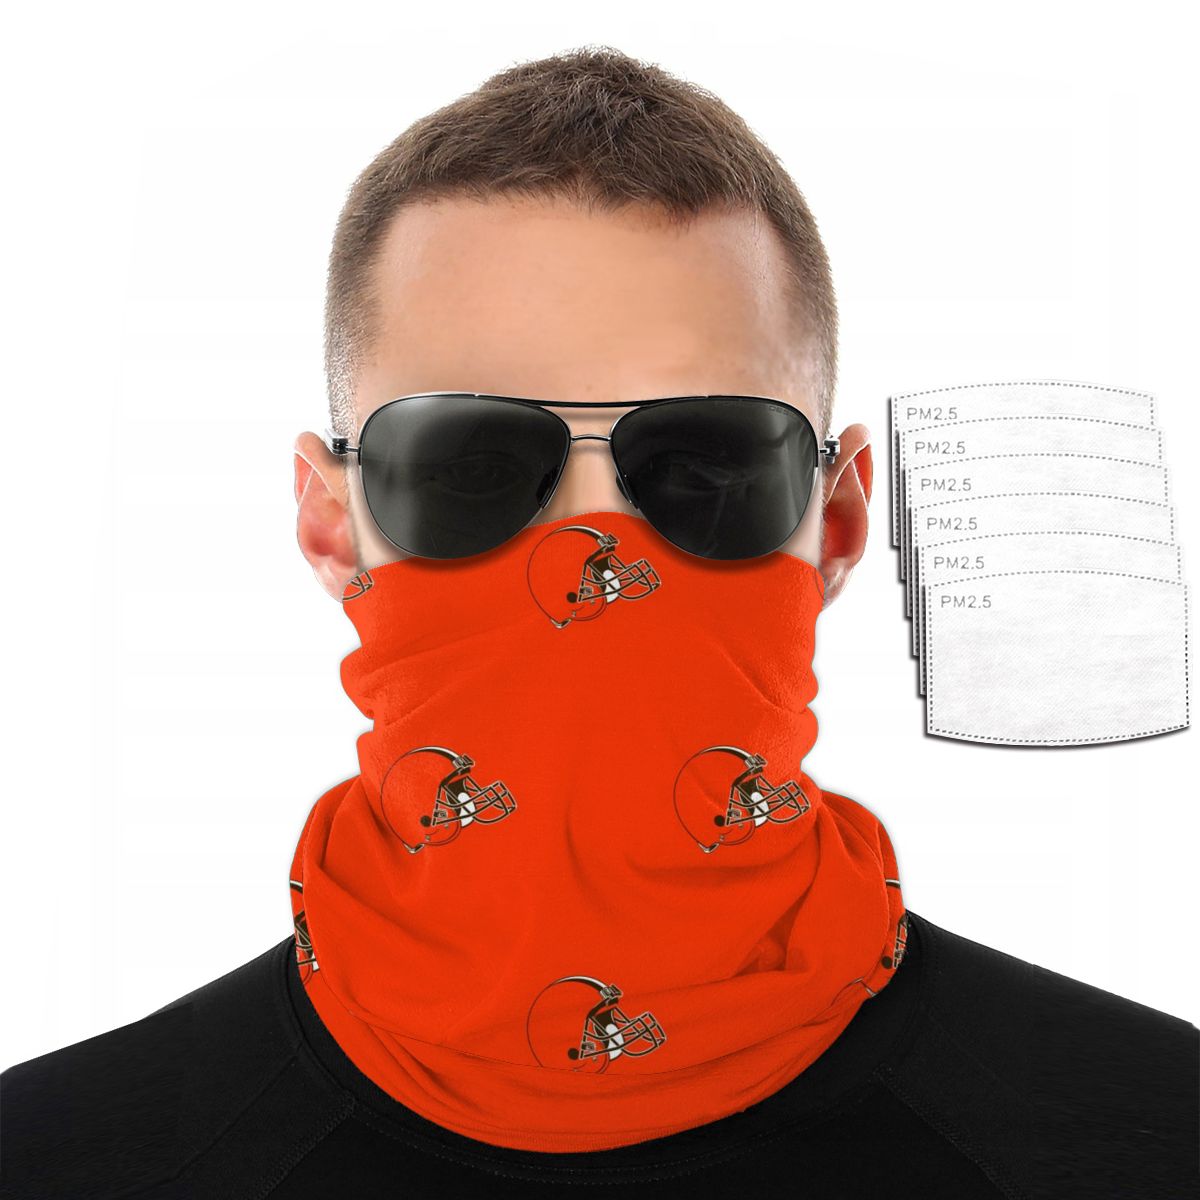 Reusble Mouth Cover Bandanas Cleveland Browns Variety Head Scarf Face Mask With PM 2.5 Filter